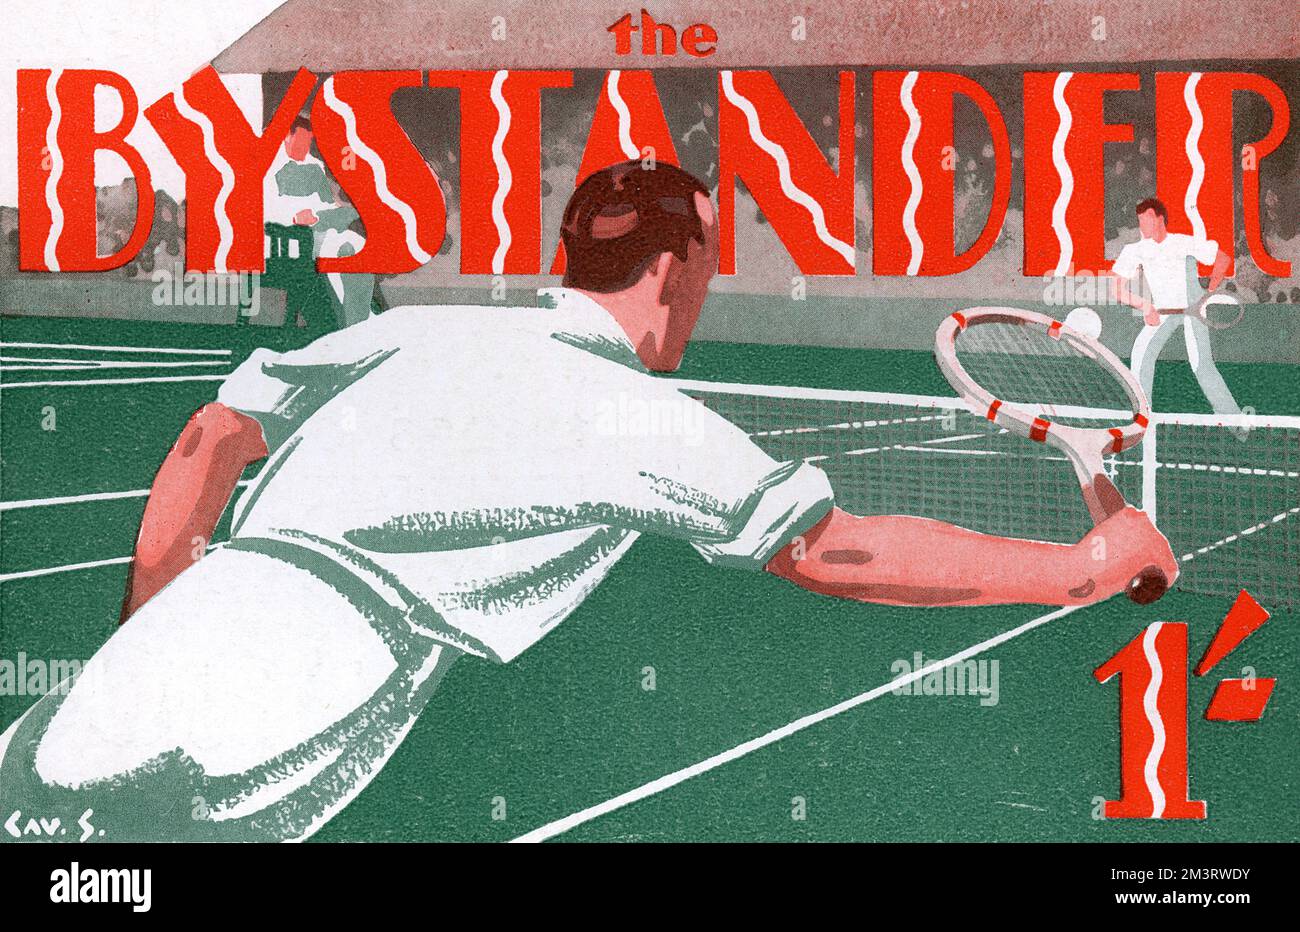 Bystander masthead design with a dynamic illustration of a men's tennis match in progress, reflecting that the 24 June 1931 is their special Wimbledon number.      Date: 1931 Stock Photo